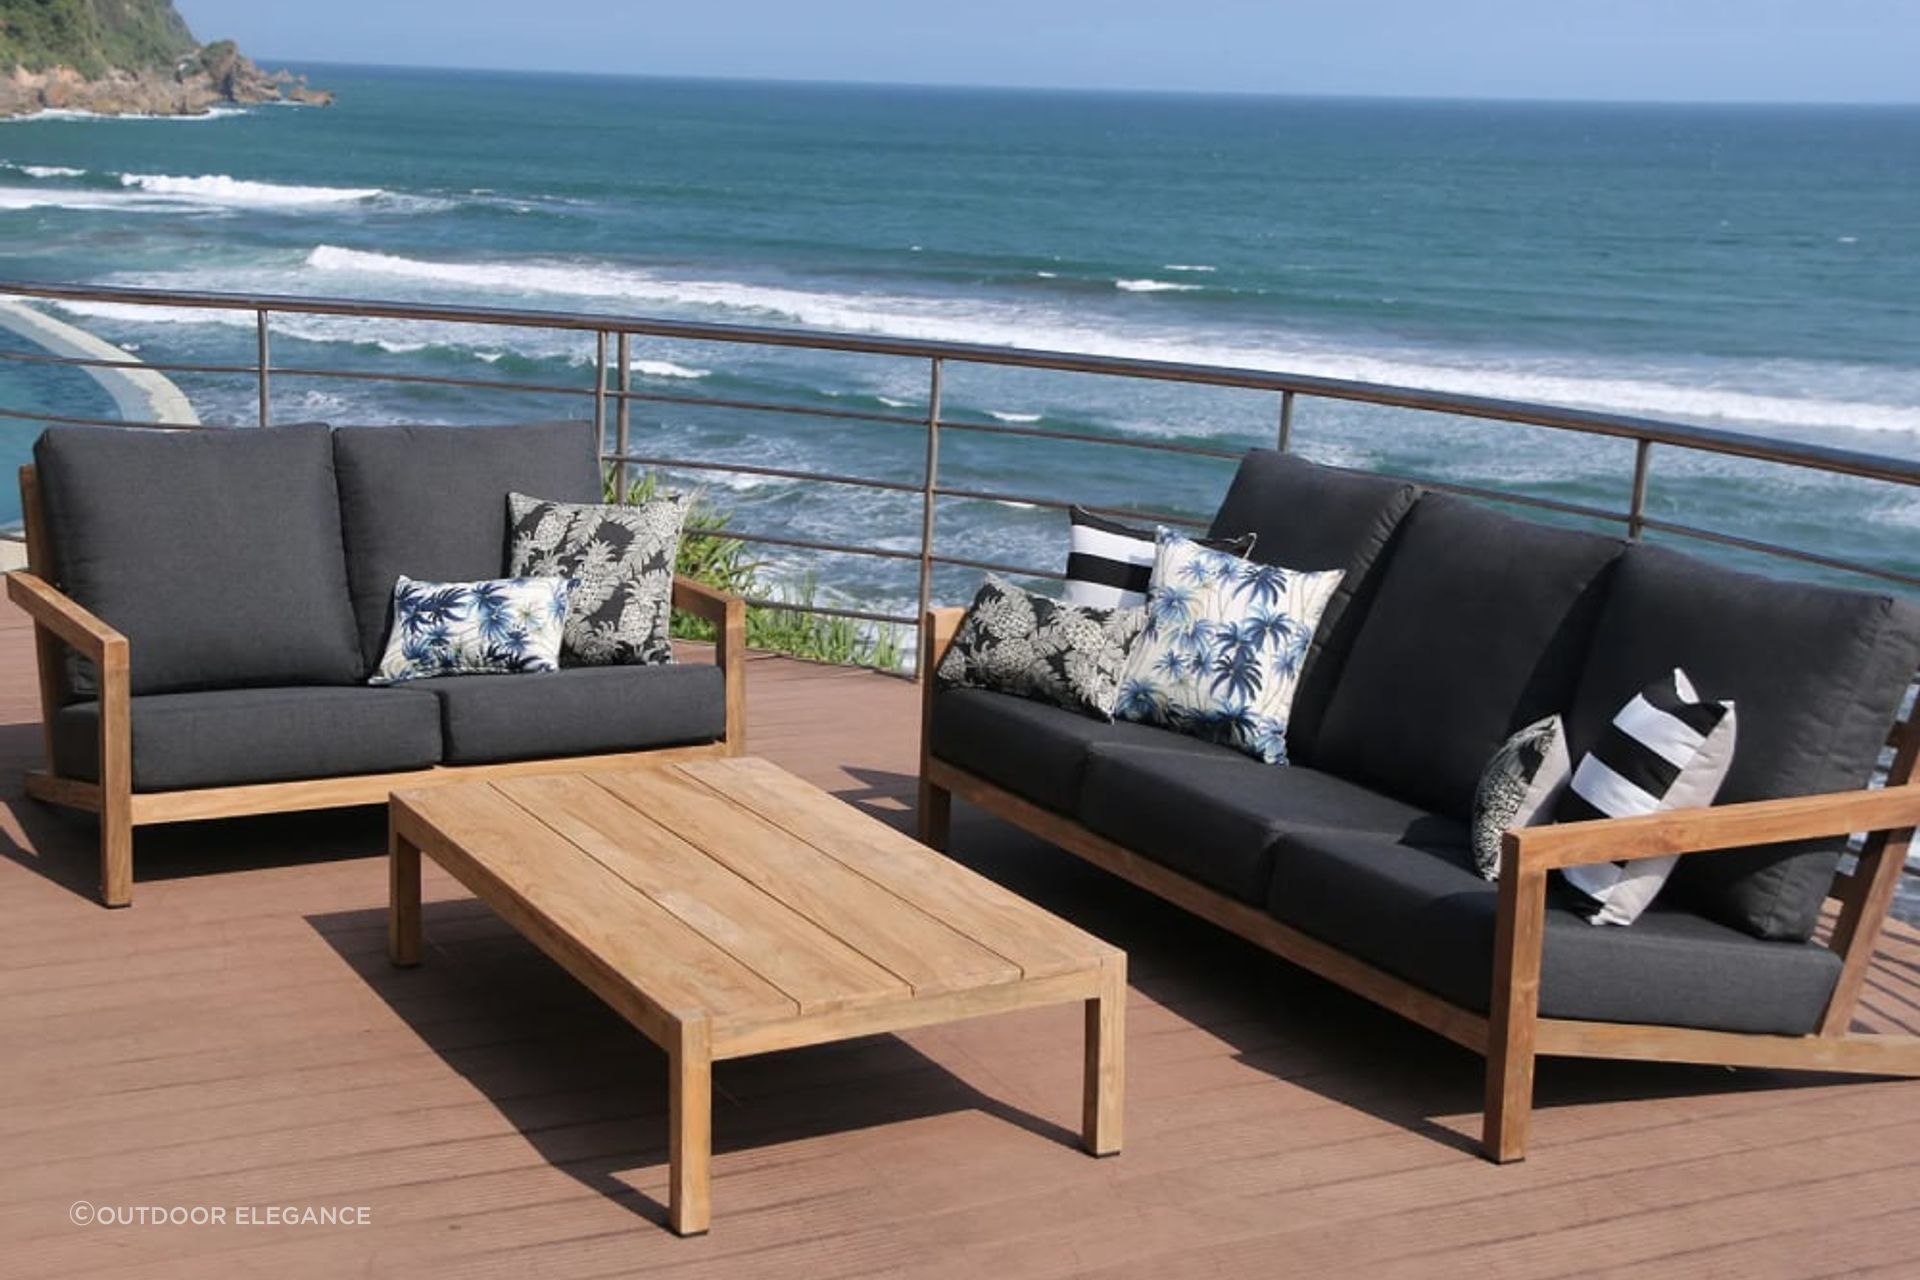 Outdoor coffee tables look great in patio and courtyard areas. Perfect for beachside properties. Featured product: Venlo 3pc Teak Outdoor Lounge Setting.